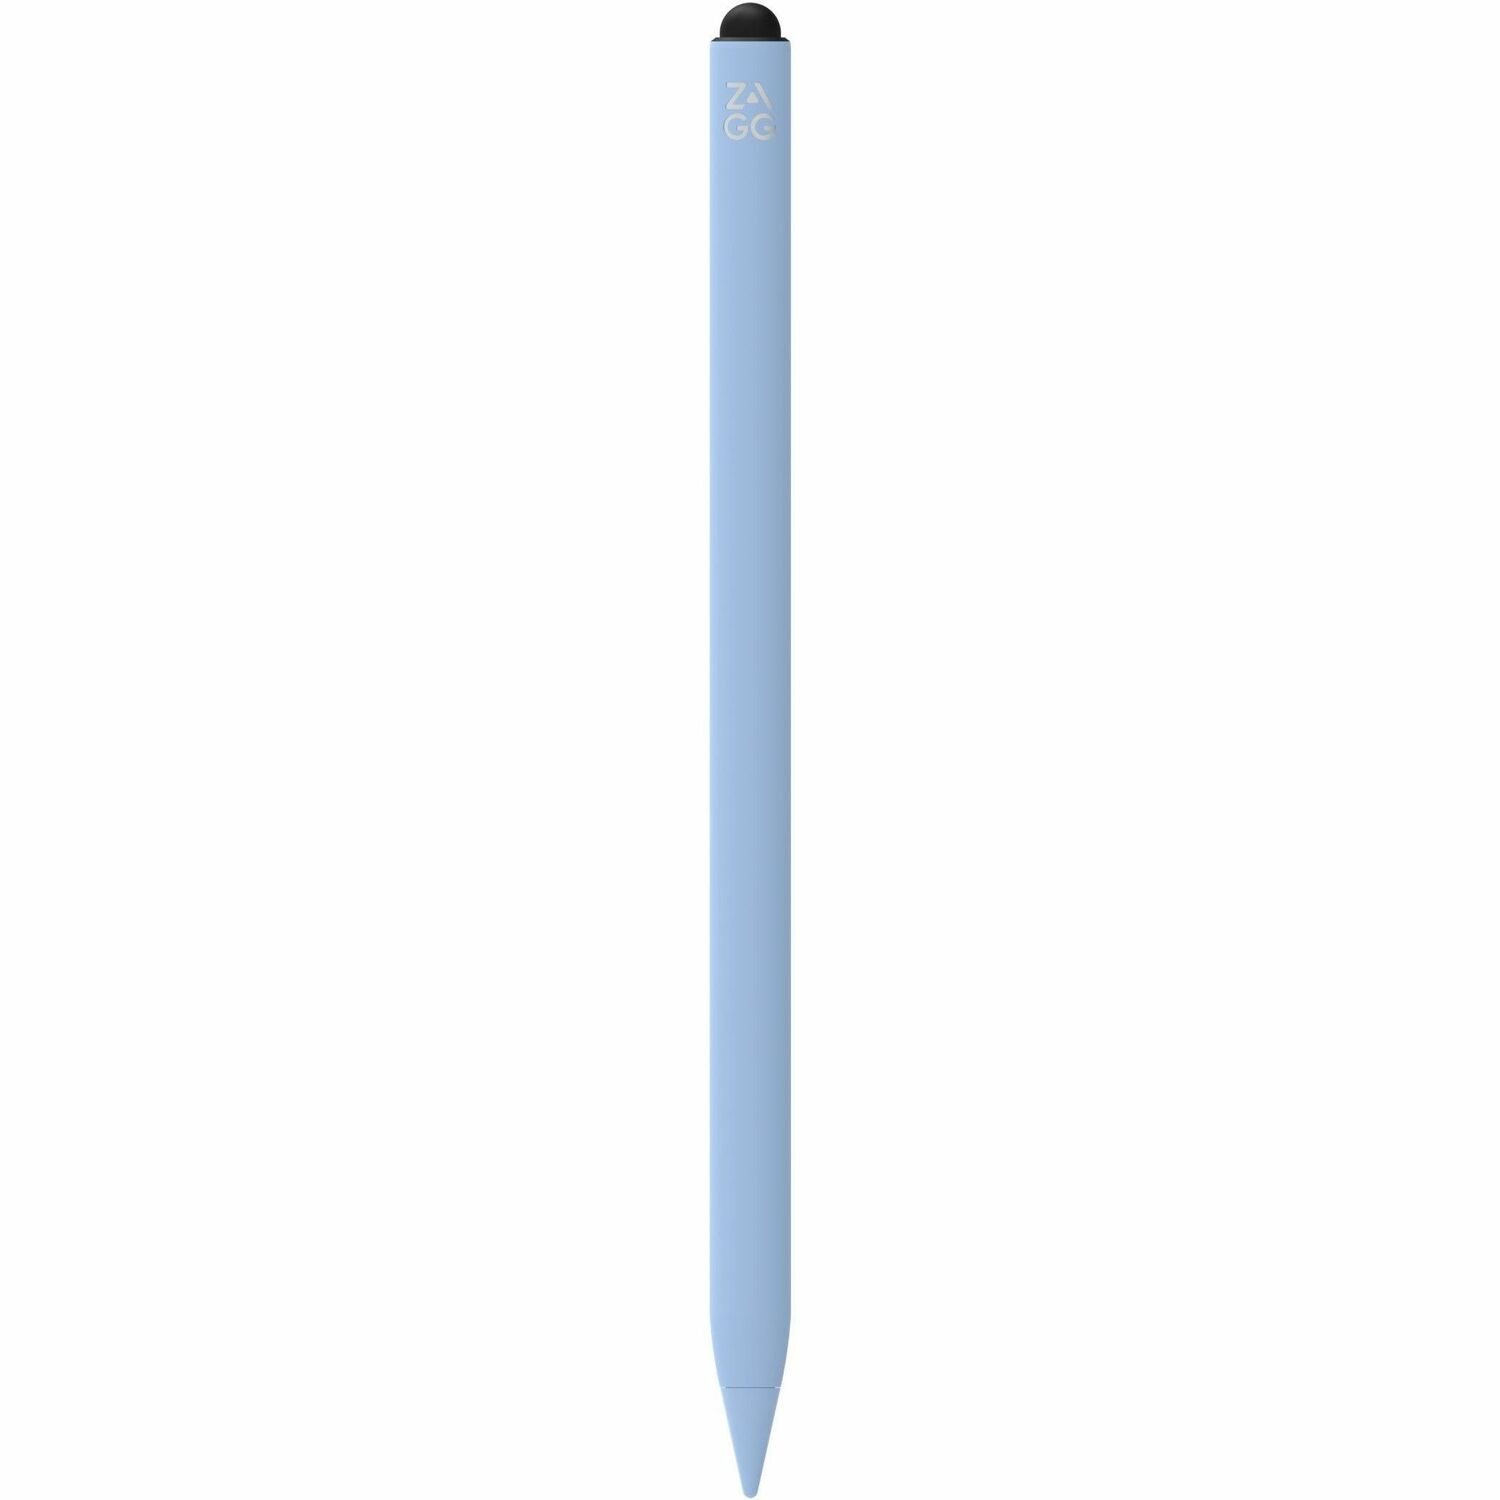 ZAGG Stylus - Capacitive Touchscreen Type Supported